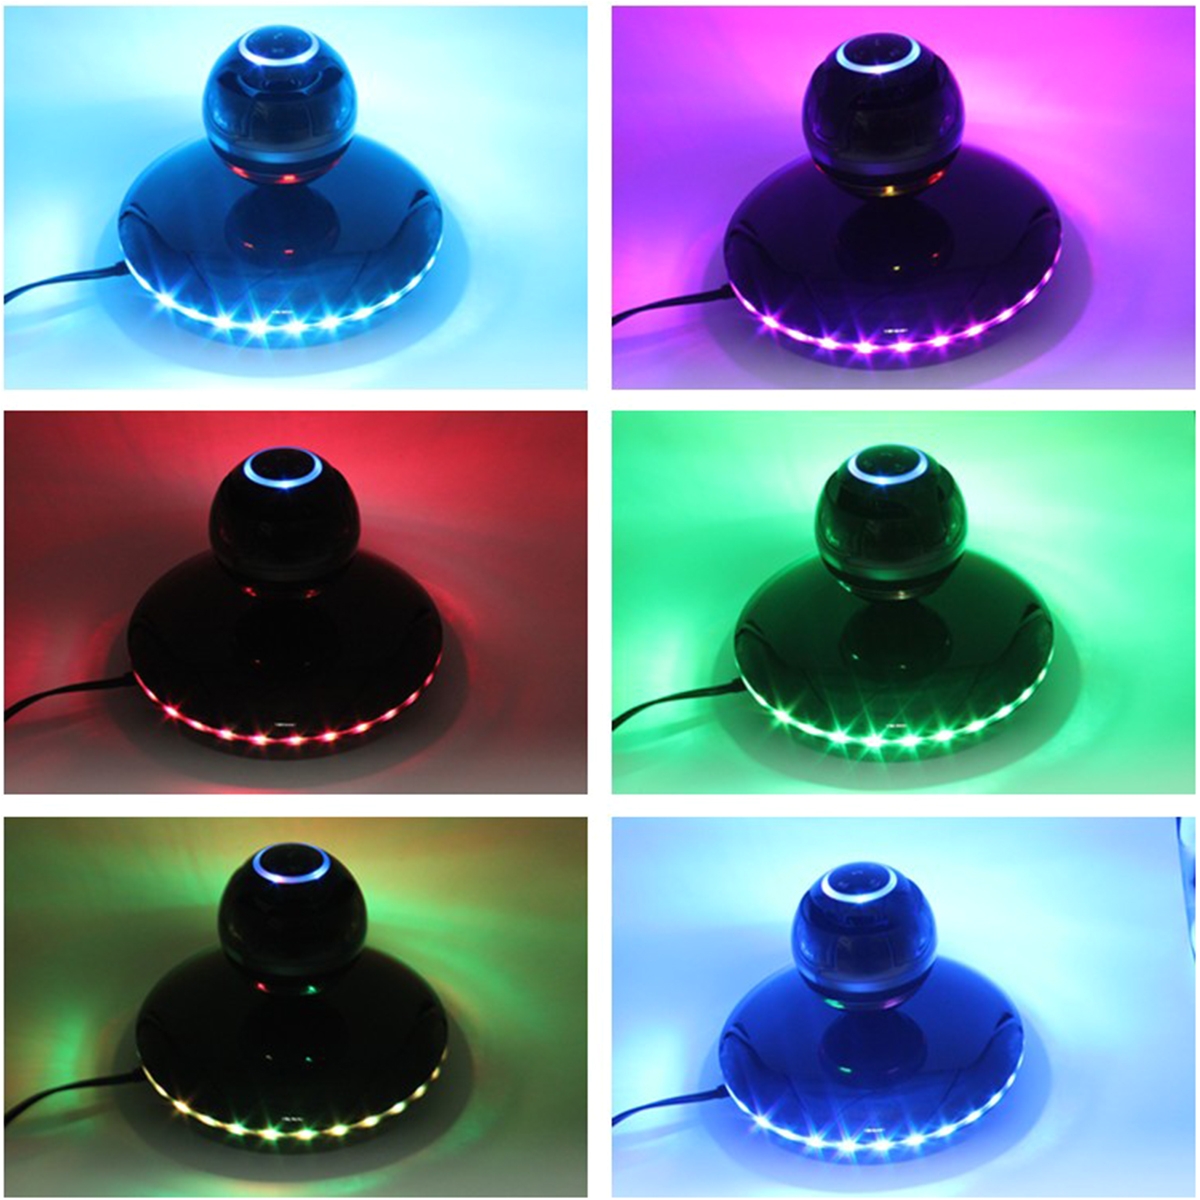 around the led lights so that your speakers out of the ordinary built in microphone support mobile phone hands free calls